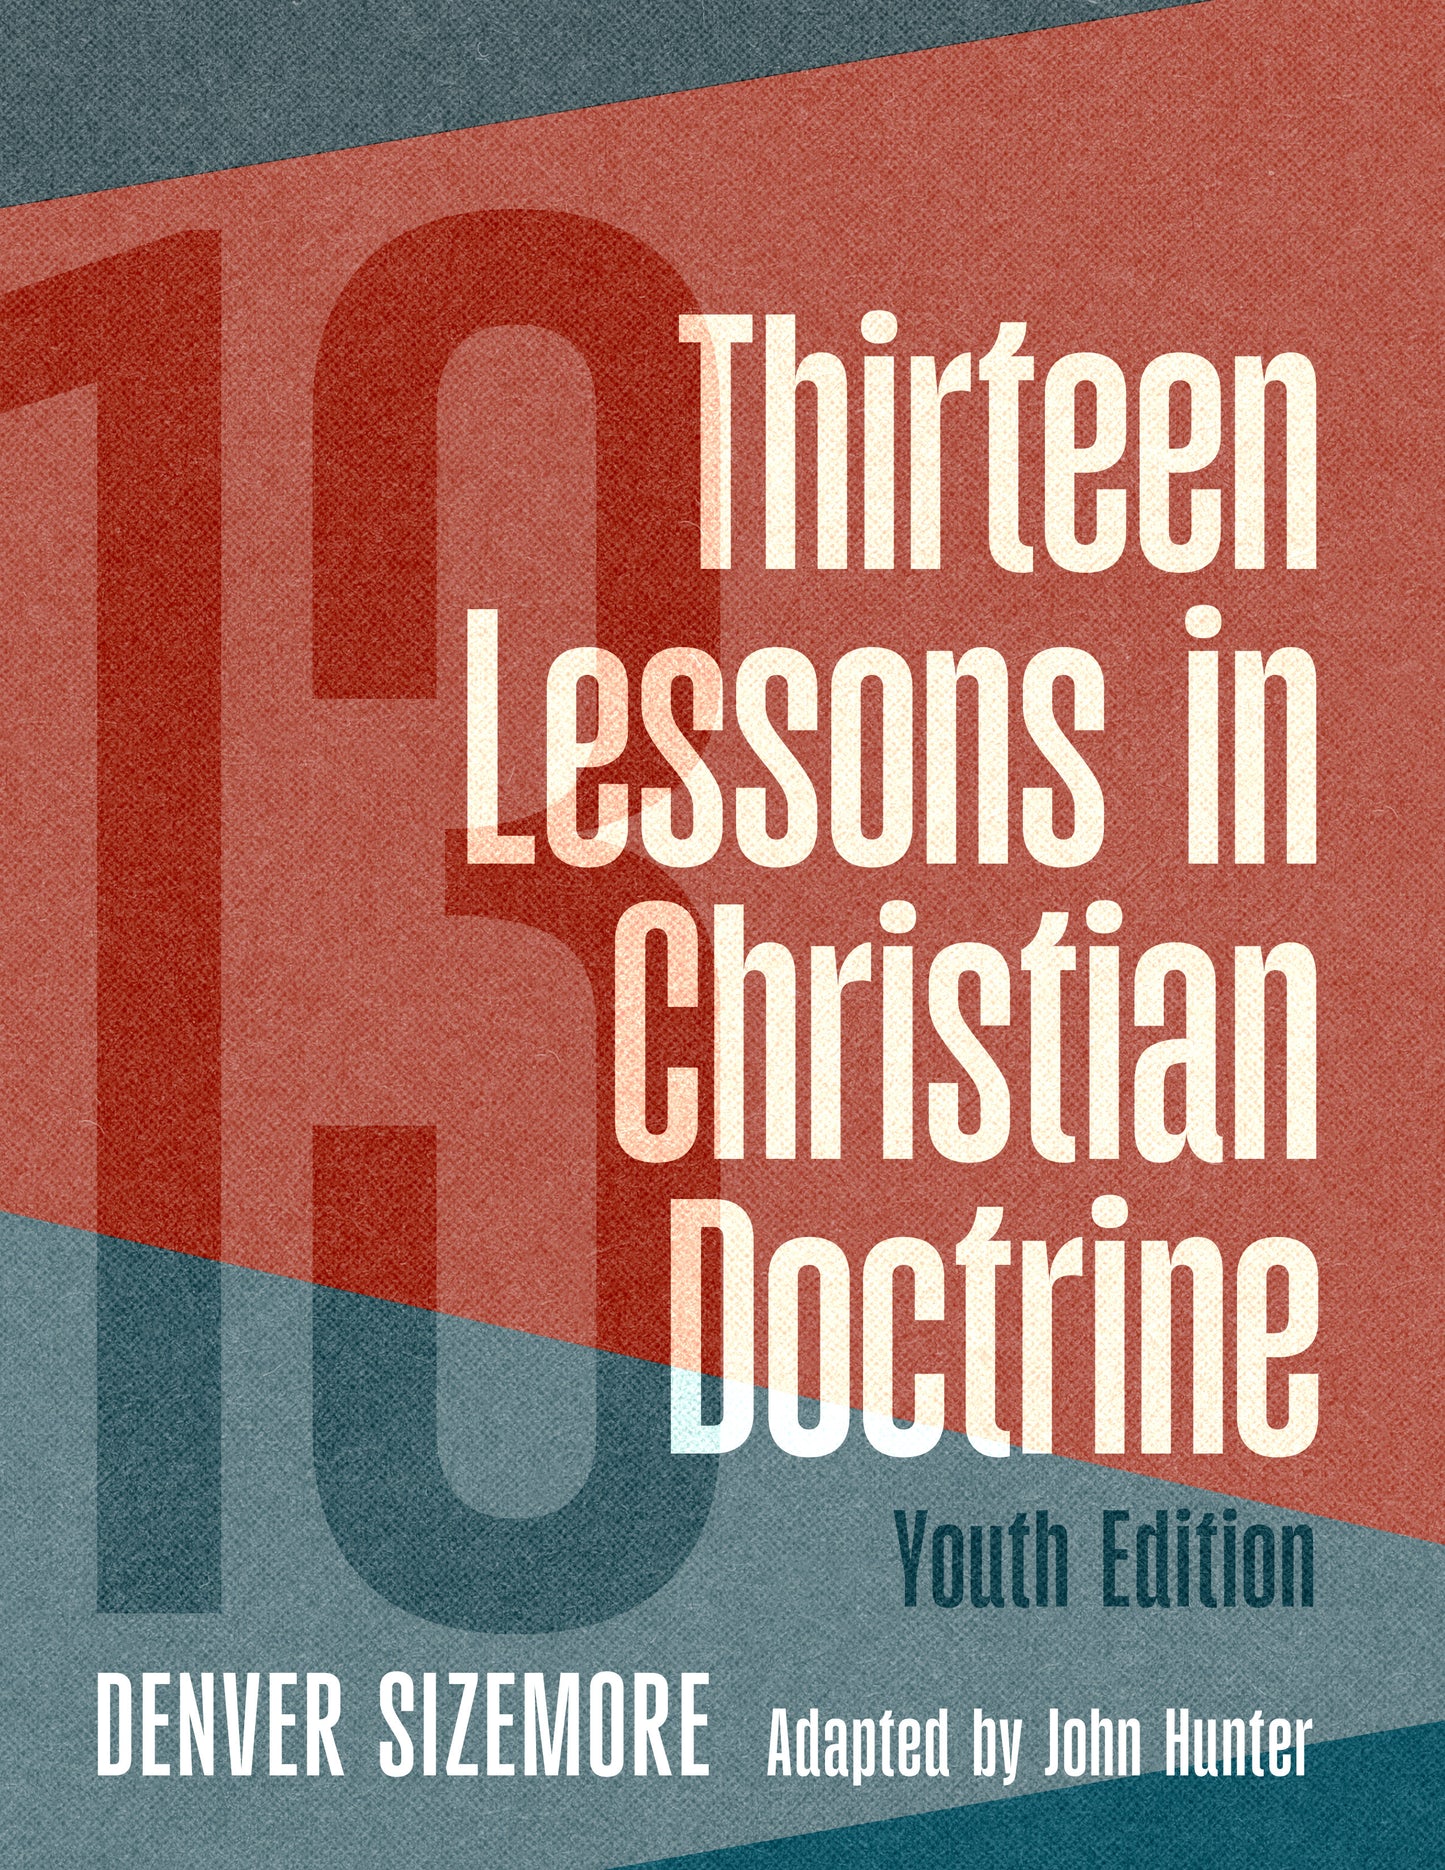 13 Lessons in Christian Doctrine - Youth Edition